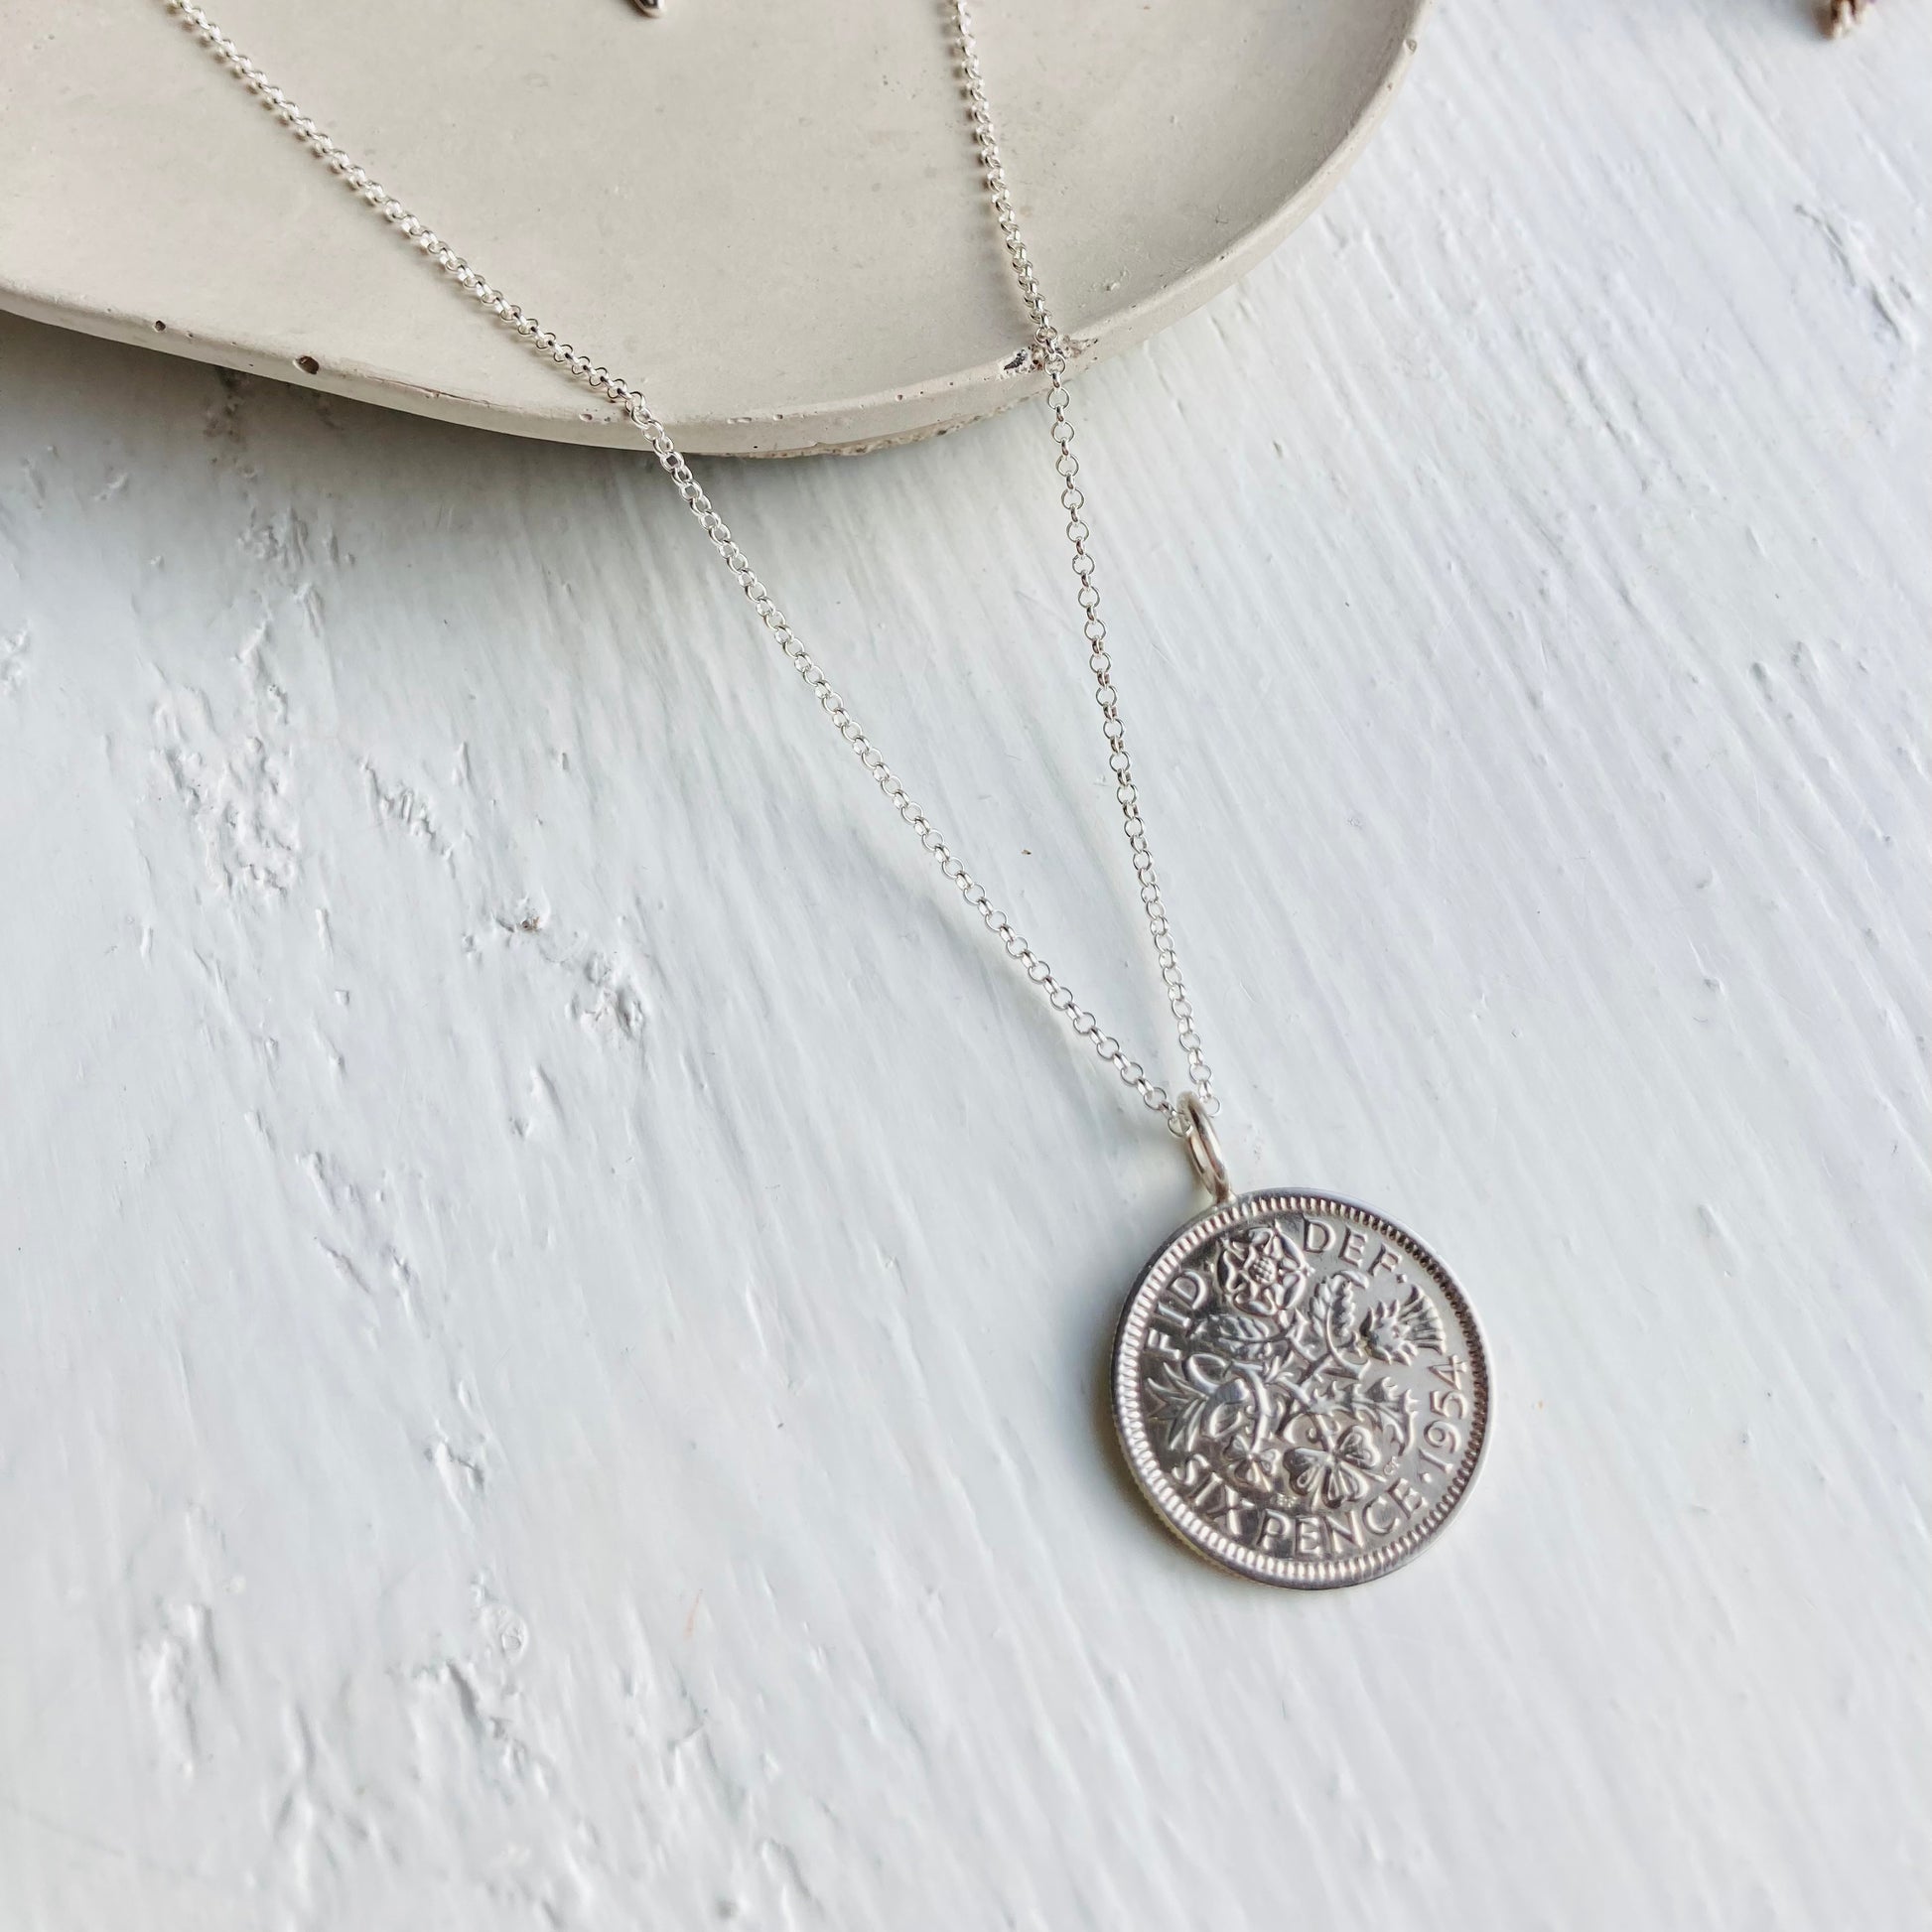 1954 Sixpence Coin Necklace